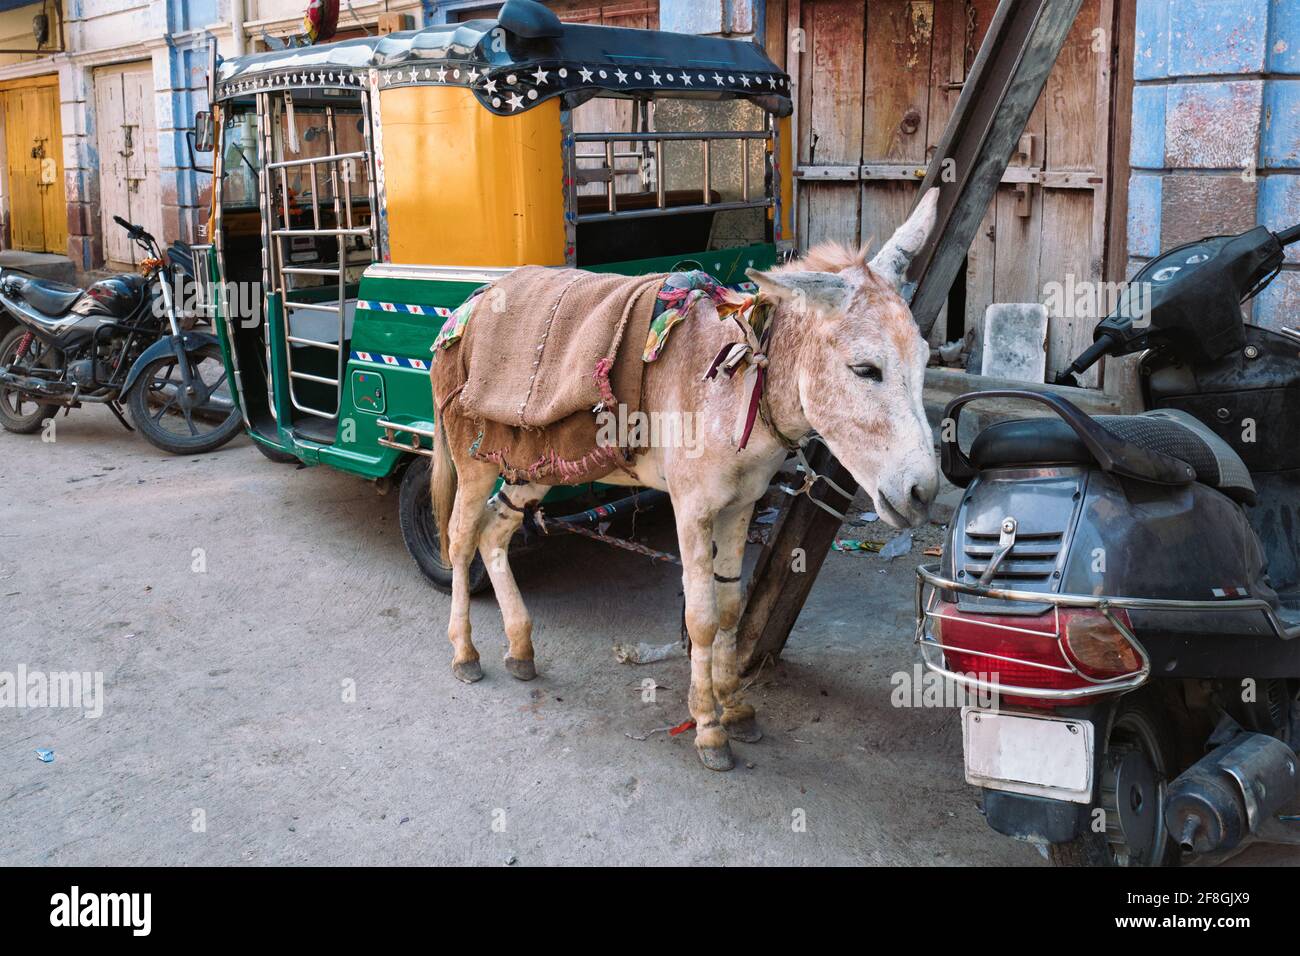 Donkey, auto rickshaw and motorcycles in indian street Stock Photo